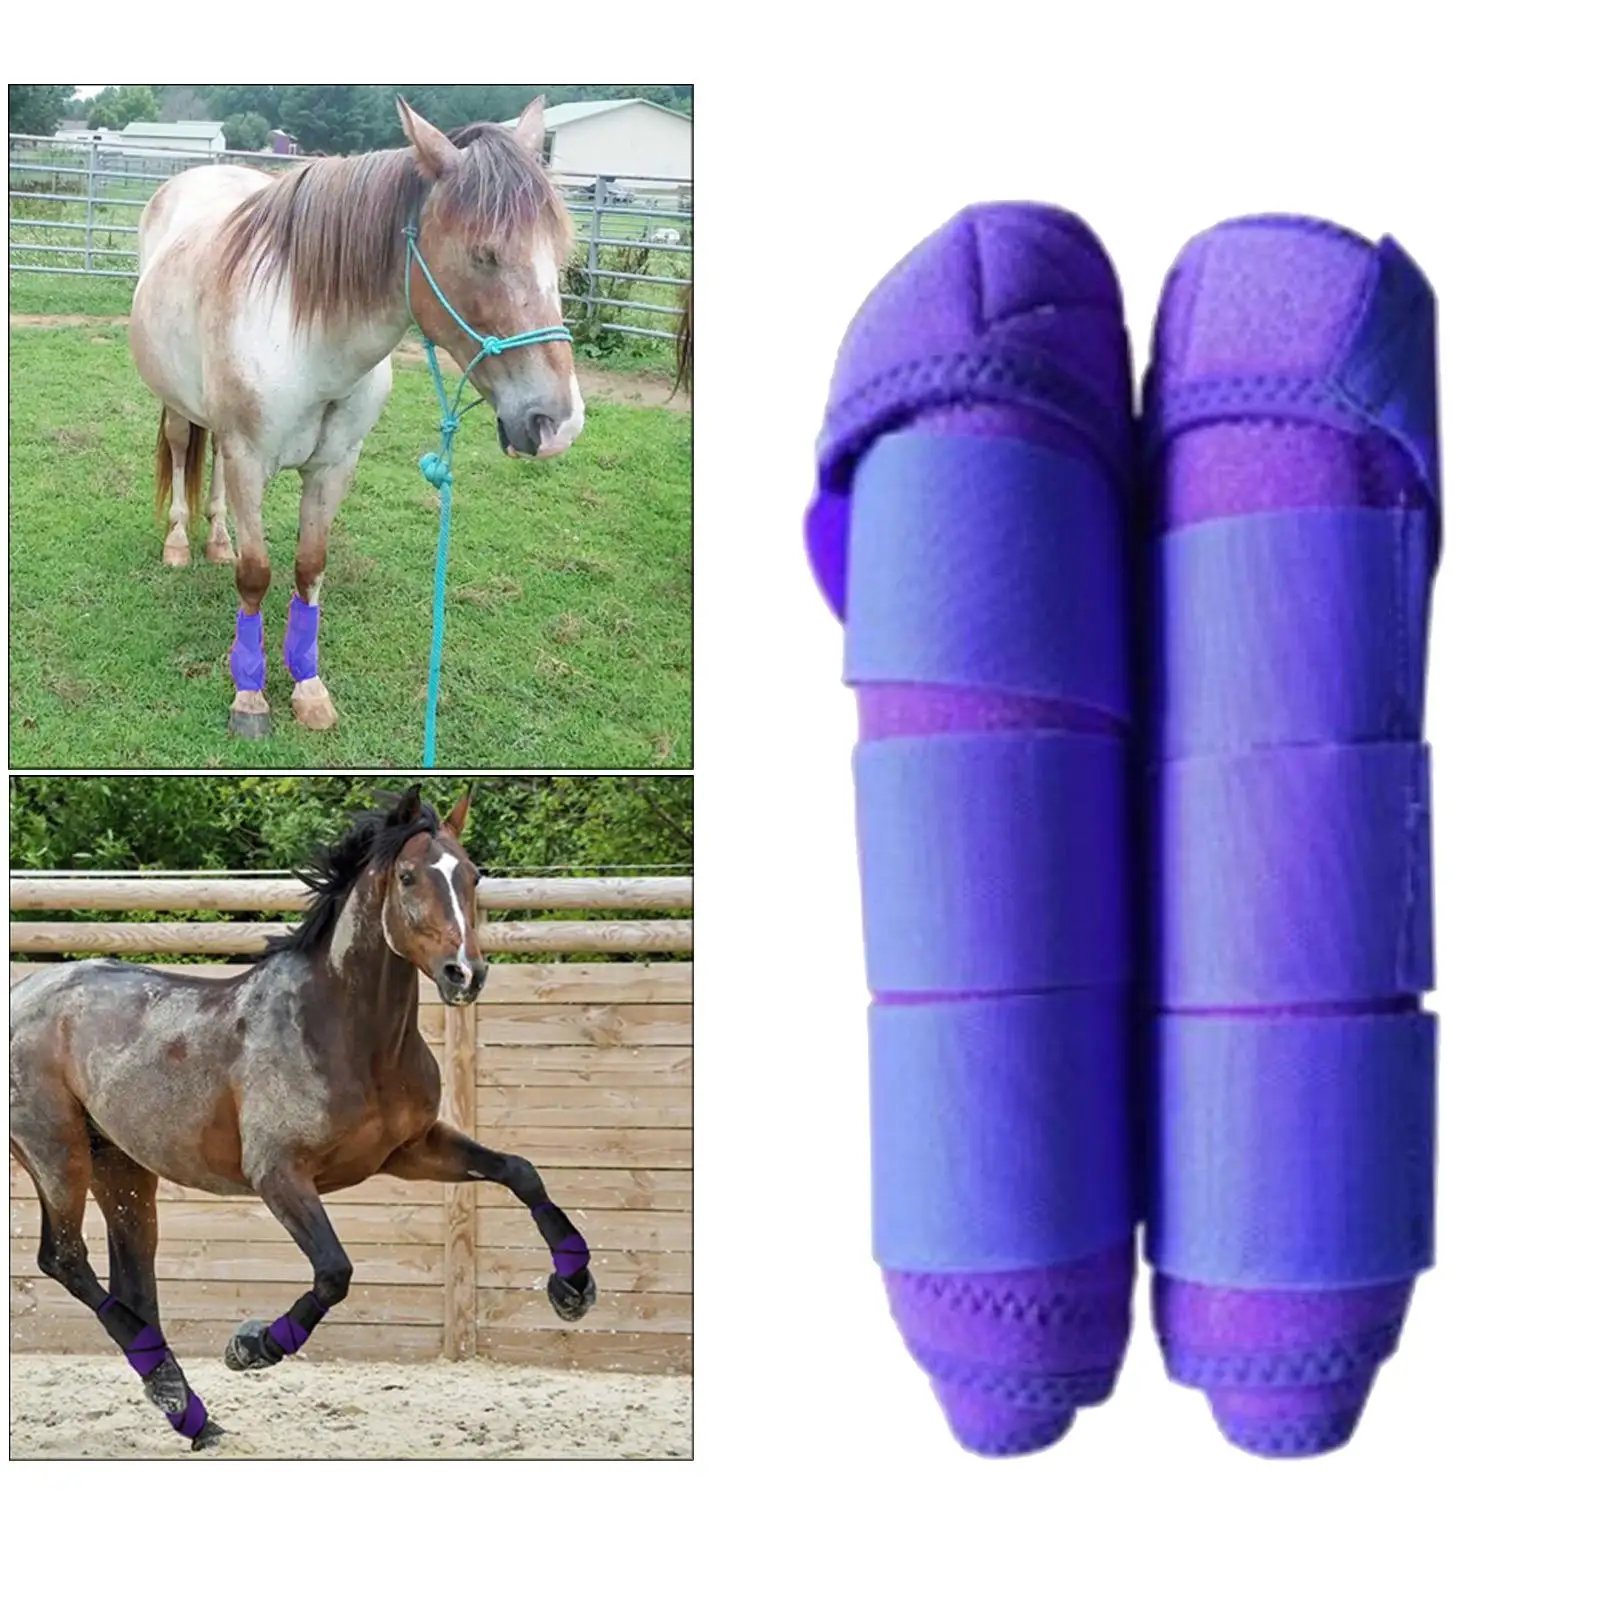 Professional Horse Tendon Boots, Pony Front Leg Wraps Support Protector Gear for Outdoor Training, Jumping, Riding